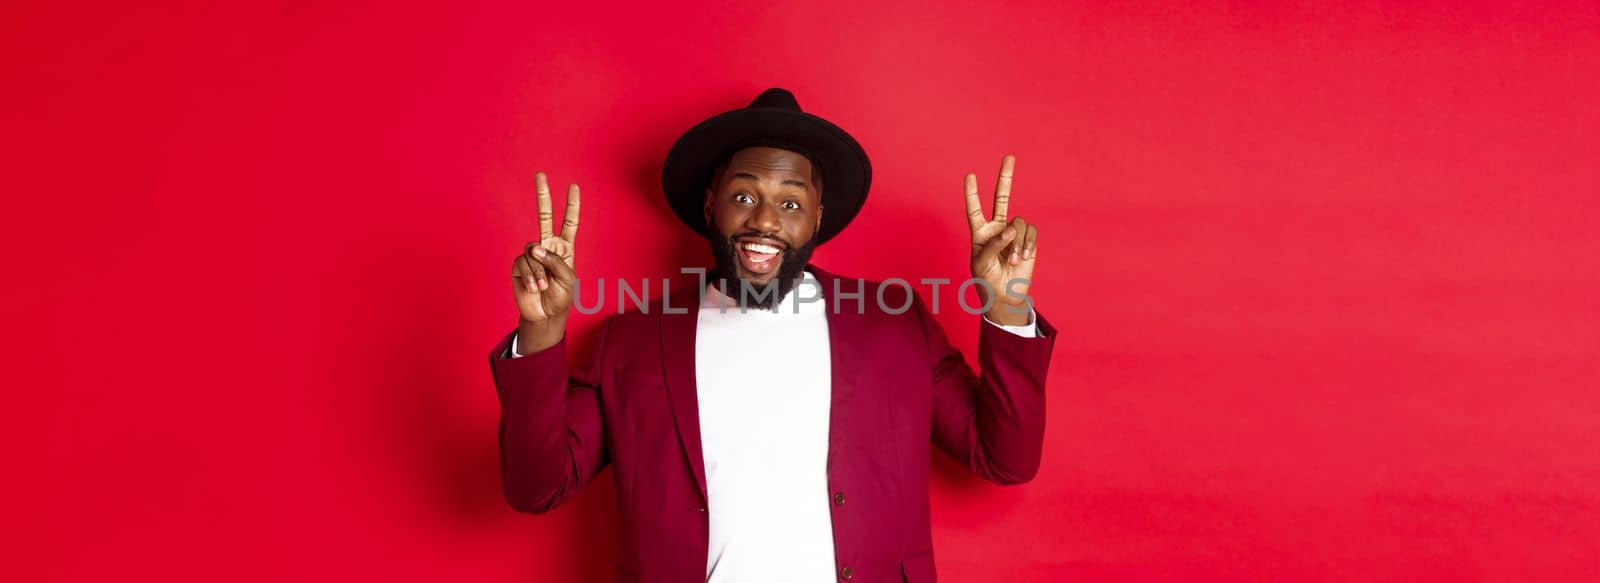 Fashion and party concept. Handsome Black man having fun, showing peace signs and smiling, standing in hat against red background.